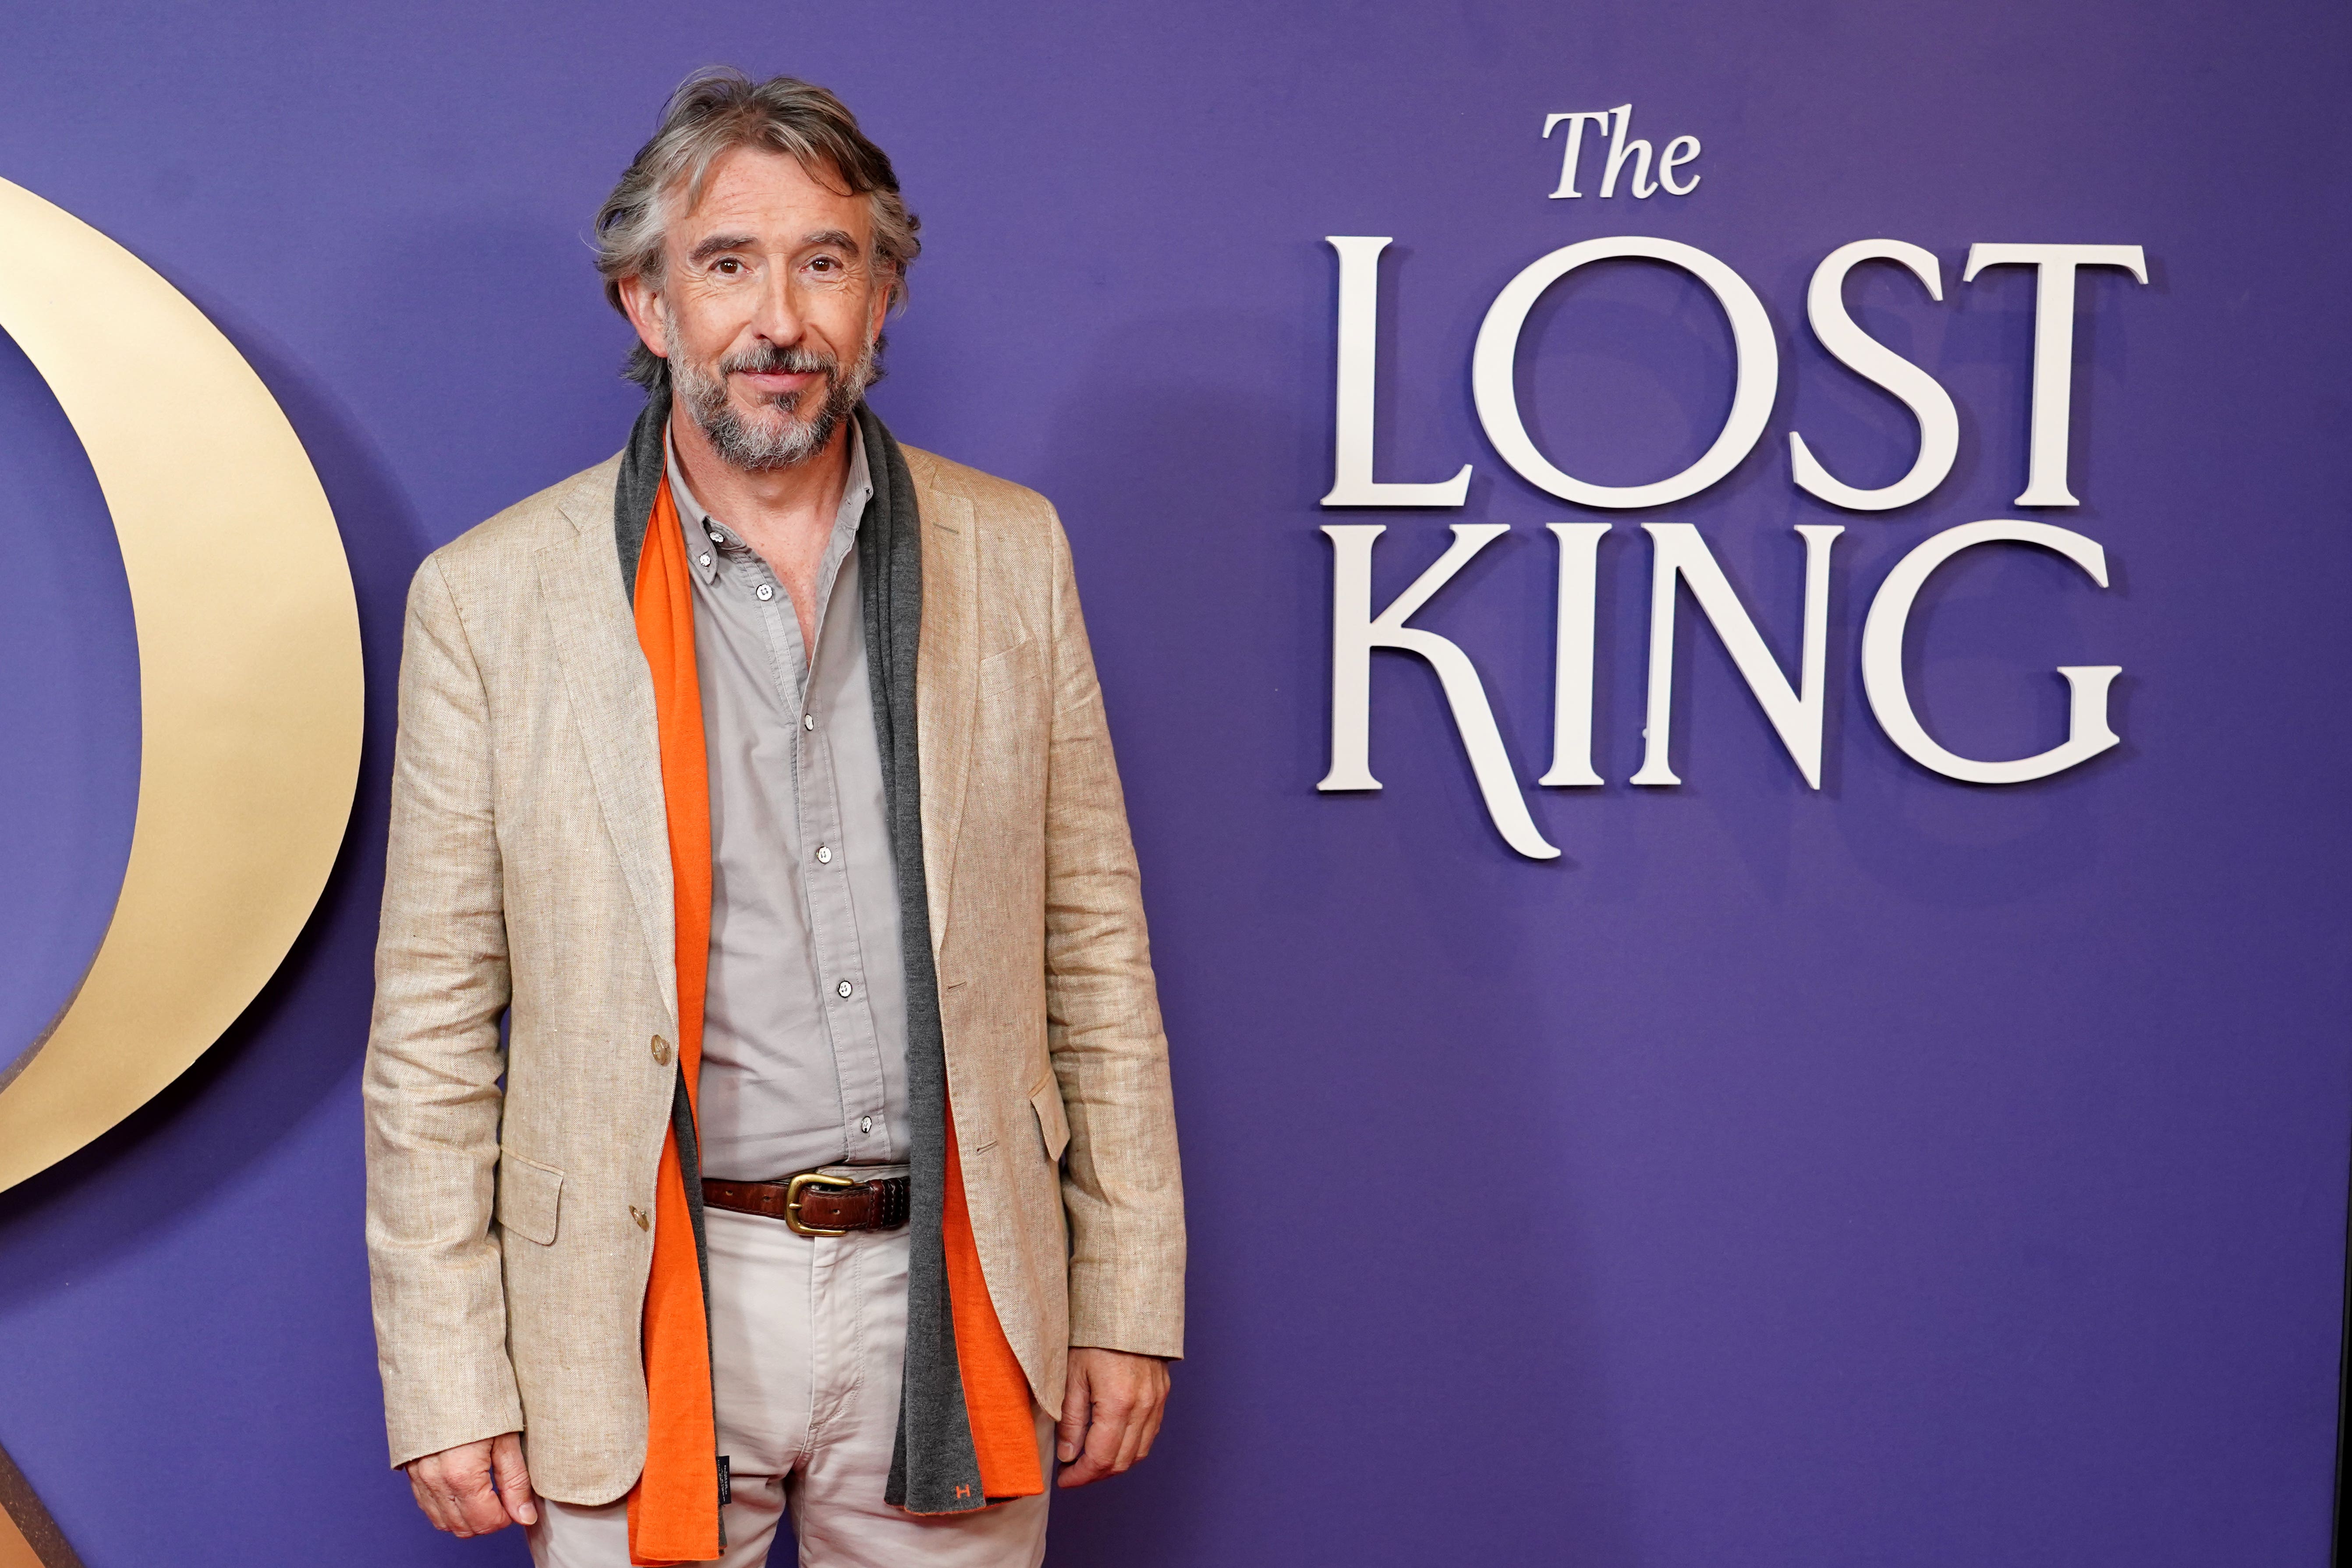 Steve Coogan is being sued for libel by a university professor over his portrayal in ‘The Lost King’